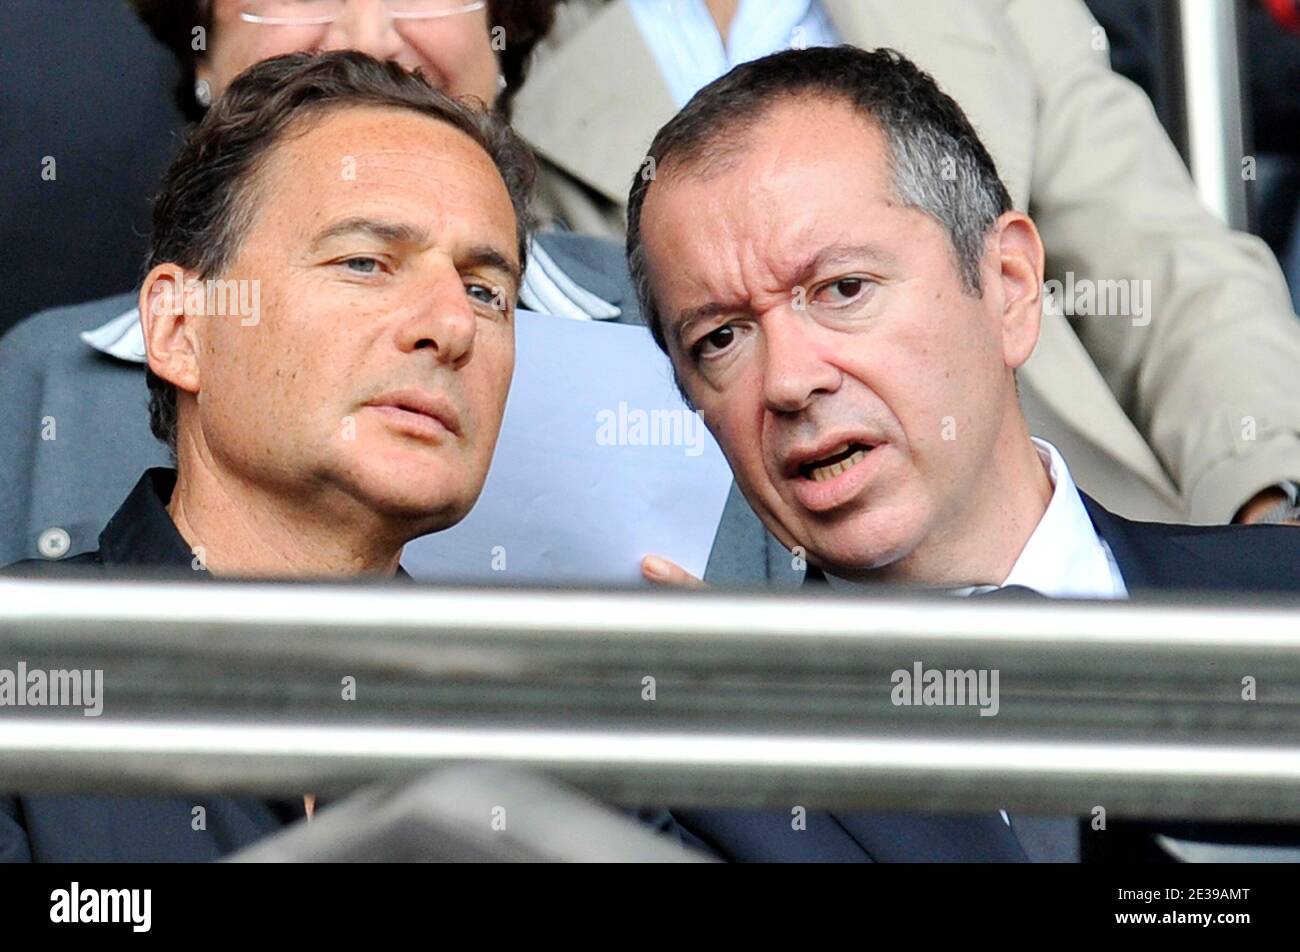 French Minister for Immigration Eric Besson with Robin Leproux during the French First league soccer match, Paris Saint Germain vs OGC Nice at the Parc des Princes in Paris, France on October 3, 2010. The match ended in a 0-0 draw. Photo by Stephane Reix/ABACAPRESS.COM Stock Photo